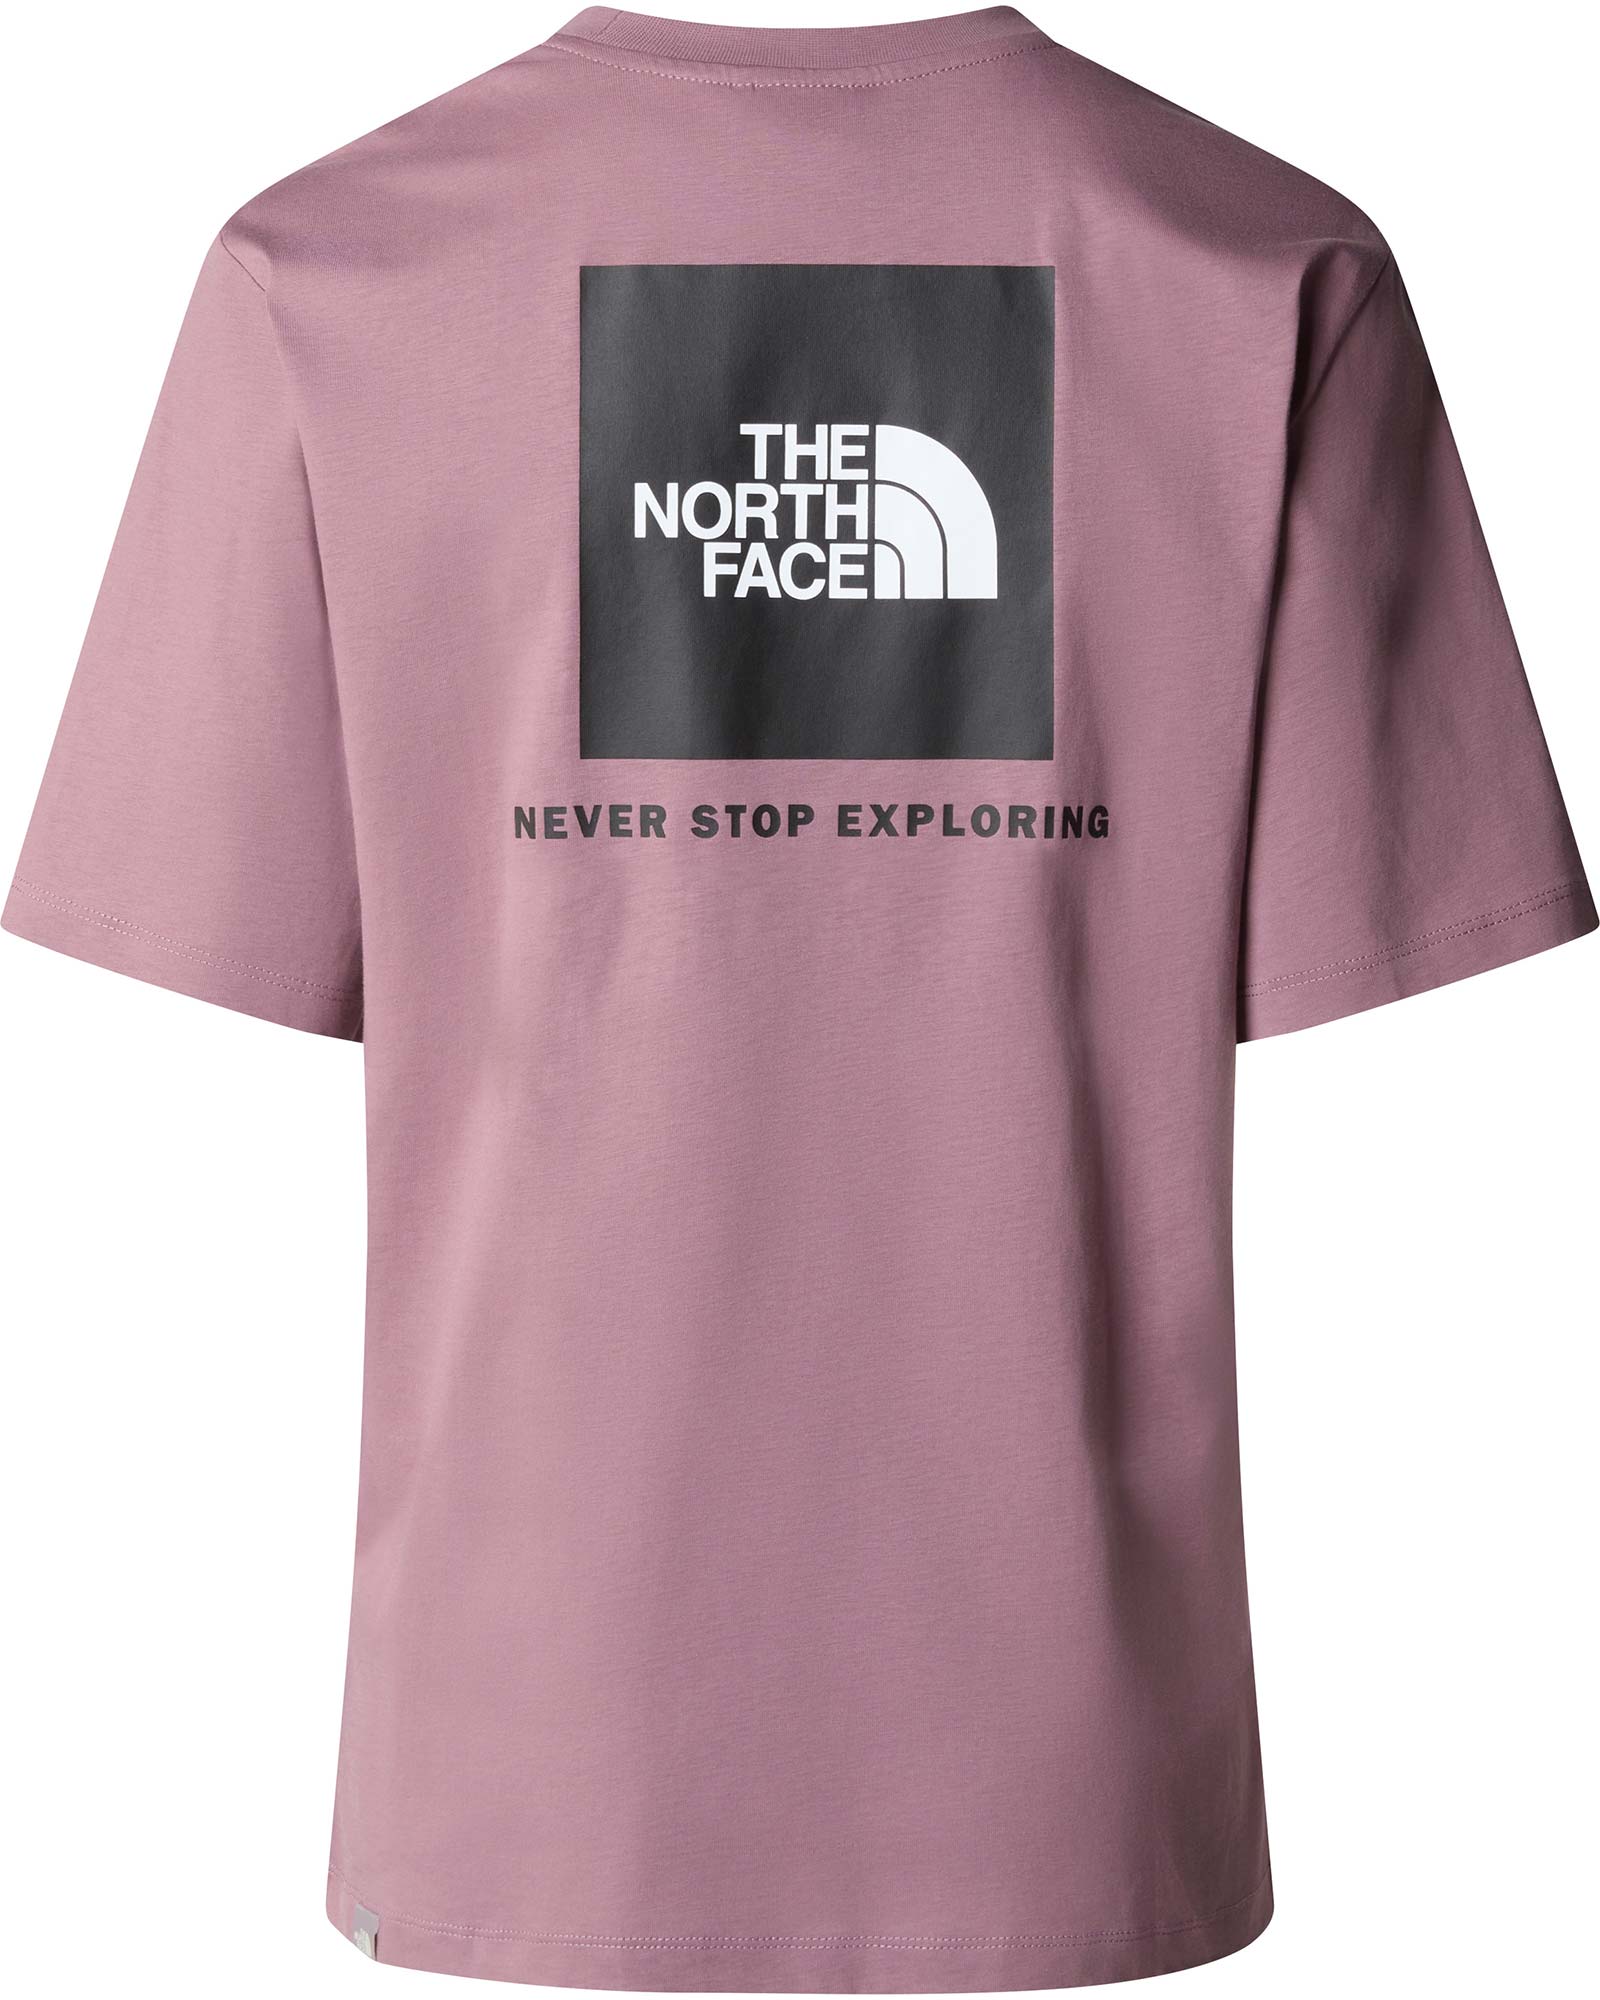 The North Face Relaxed Redbox Women’s T Shirt - Fawn Grey XS